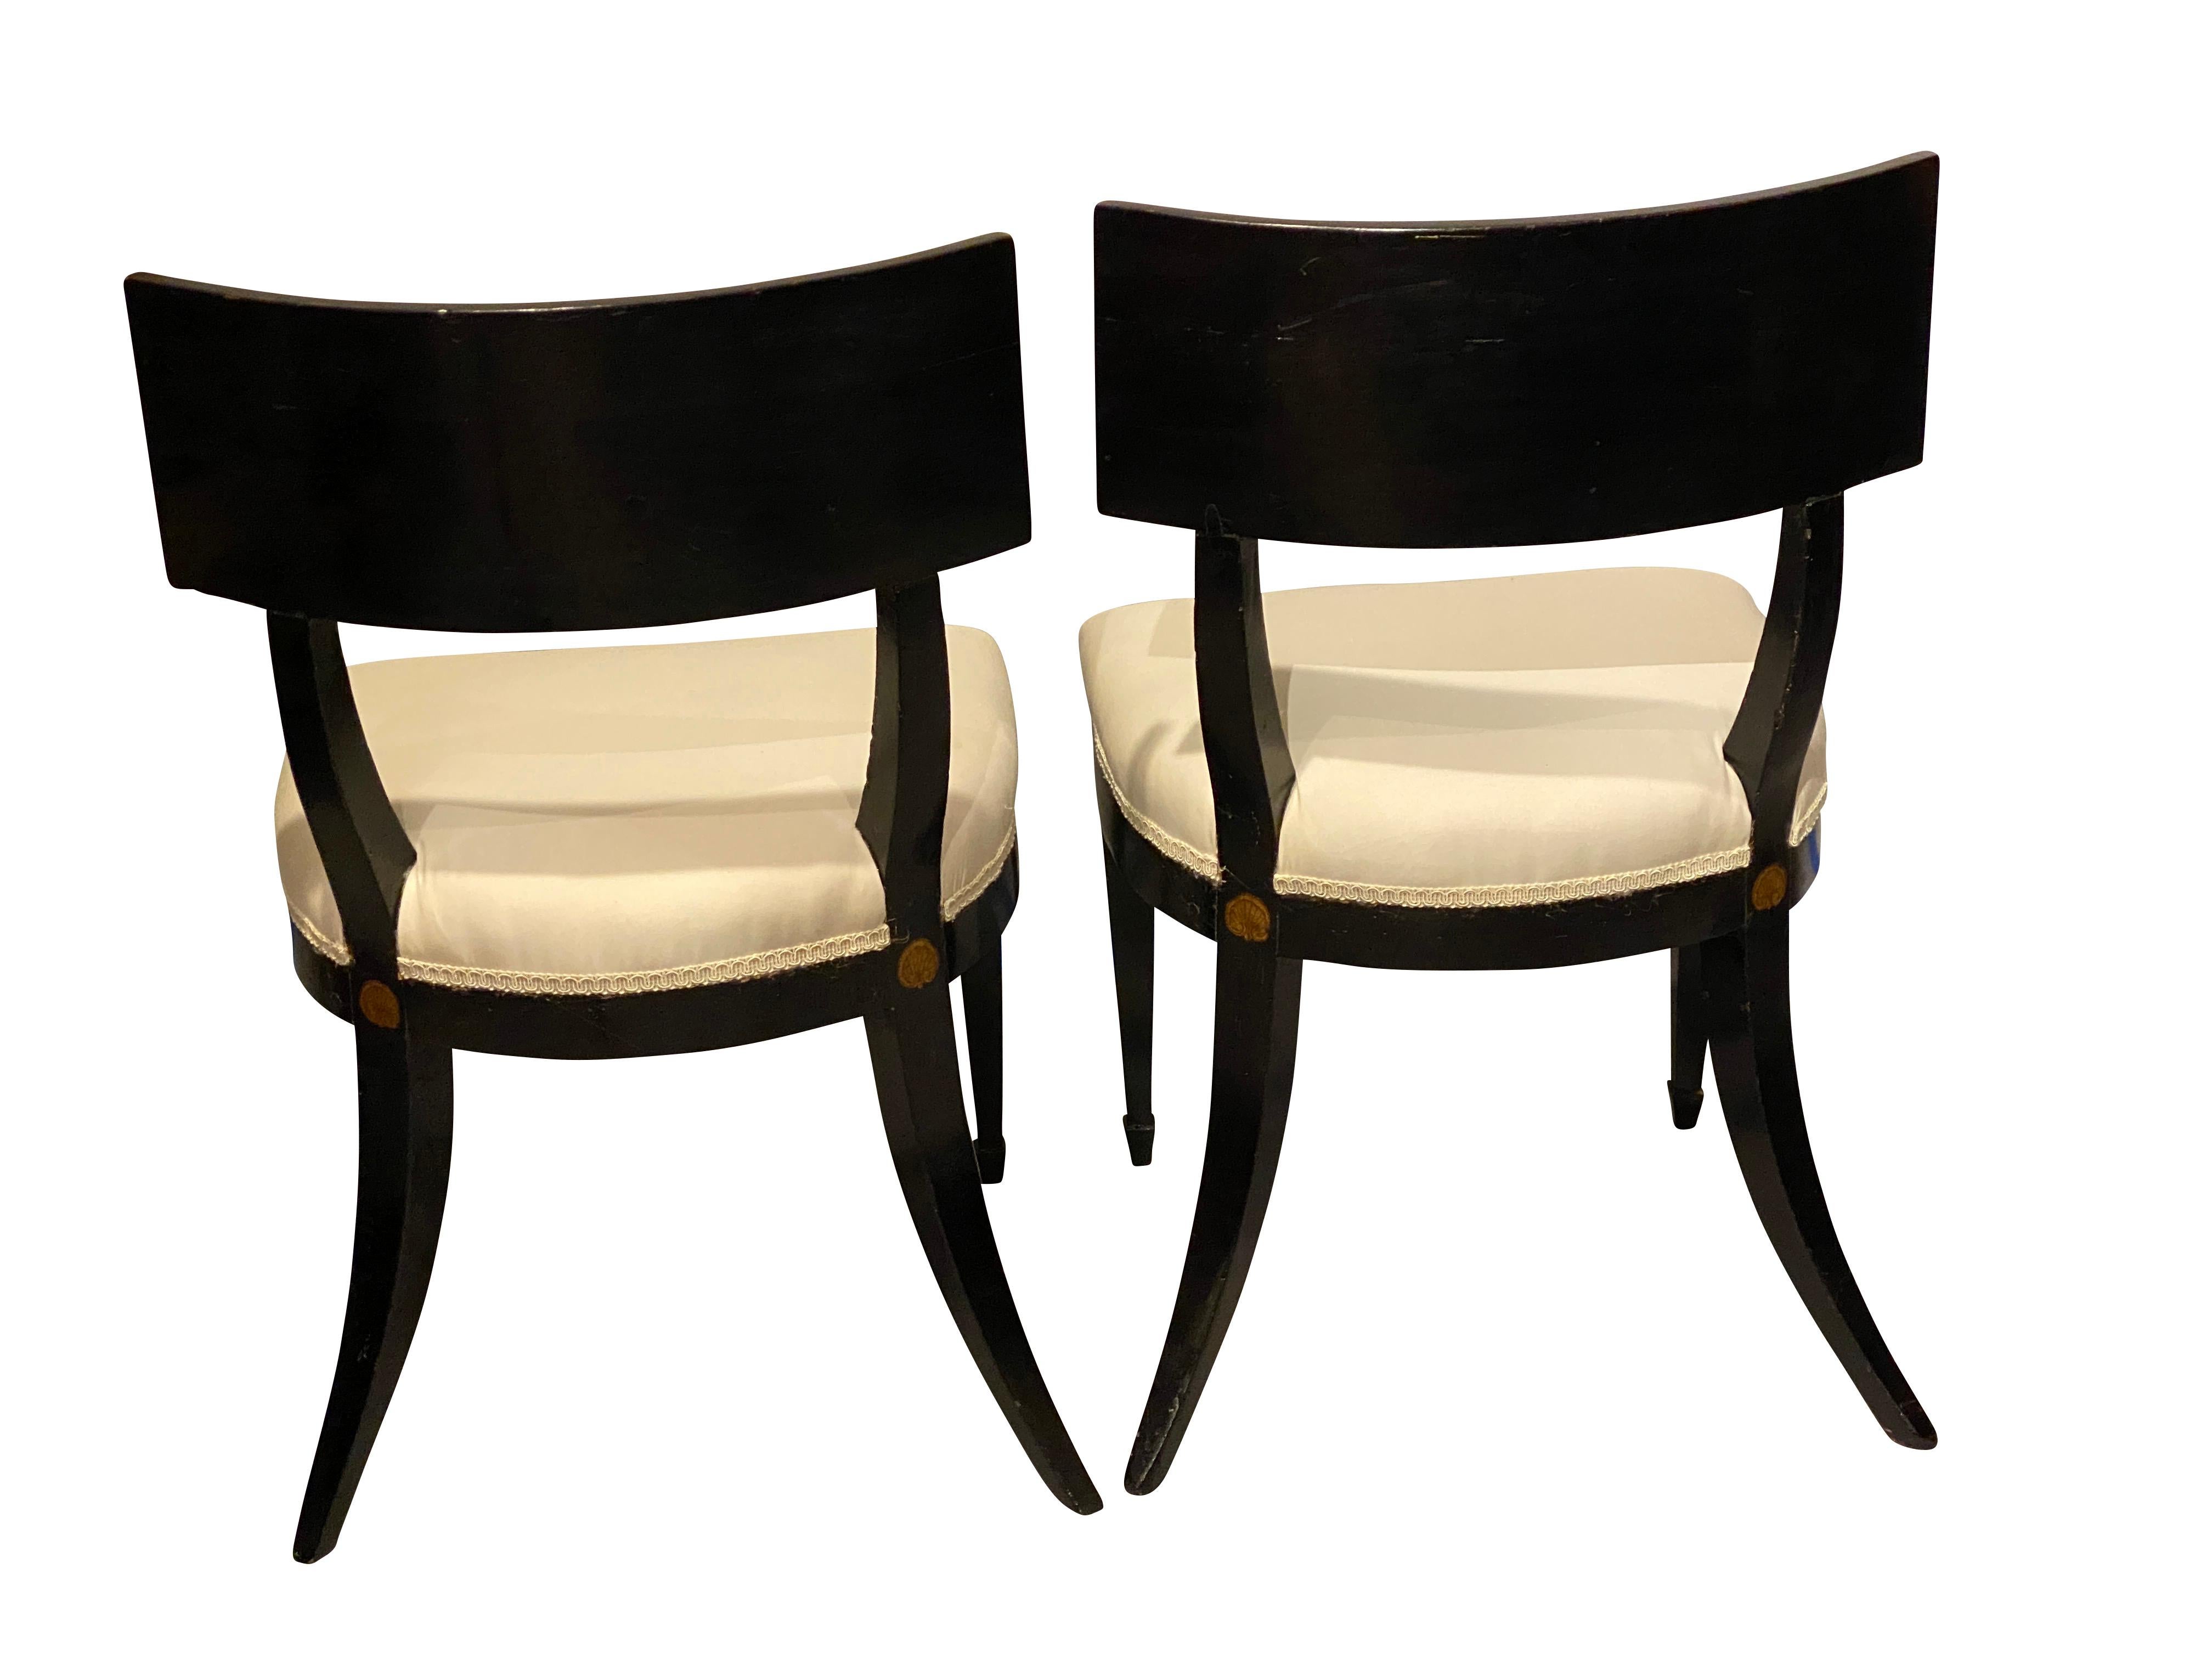 Pair of Regency Ebonized Klismos Side Chairs In Good Condition For Sale In Essex, MA